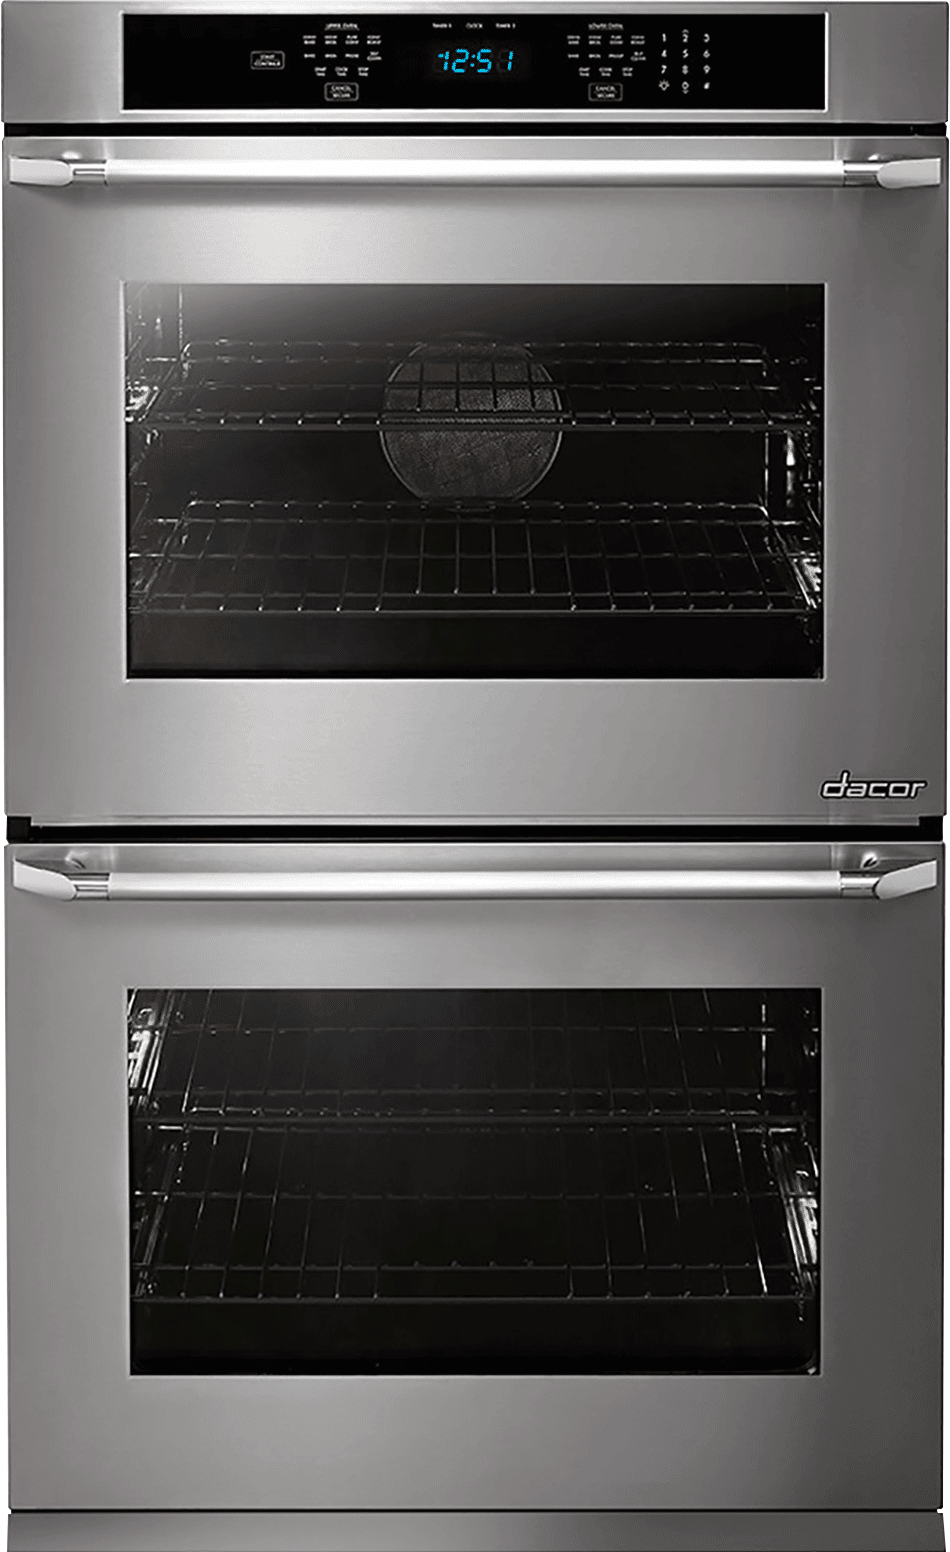 basic instruction oven with electric stove system